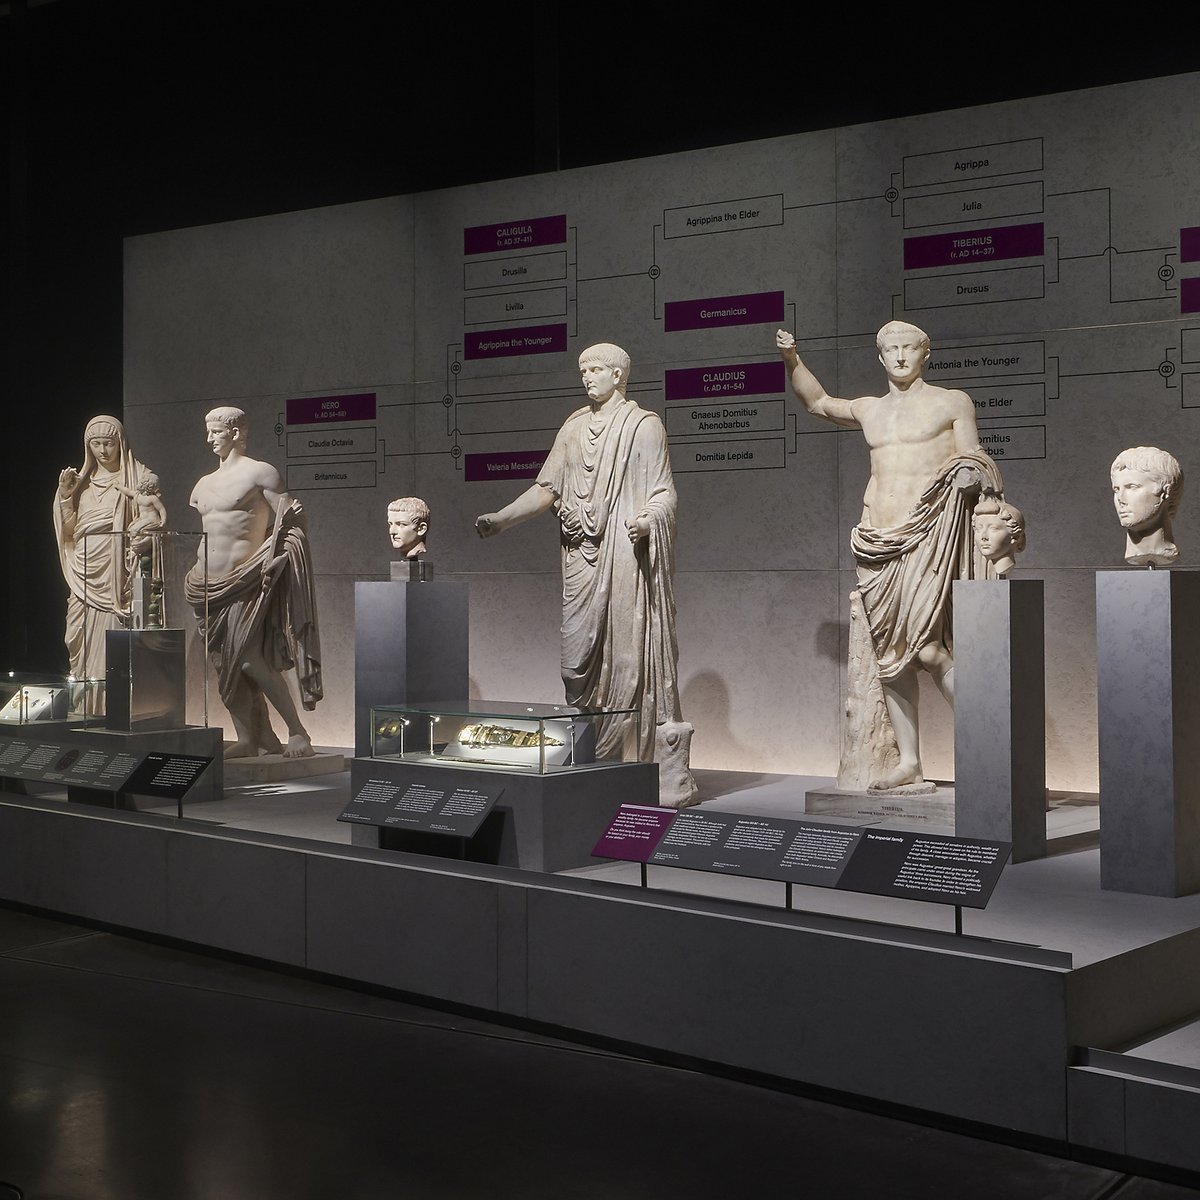 Inside the exhibition - Nero's family tree is shown through a row of statues, busts and objects. 